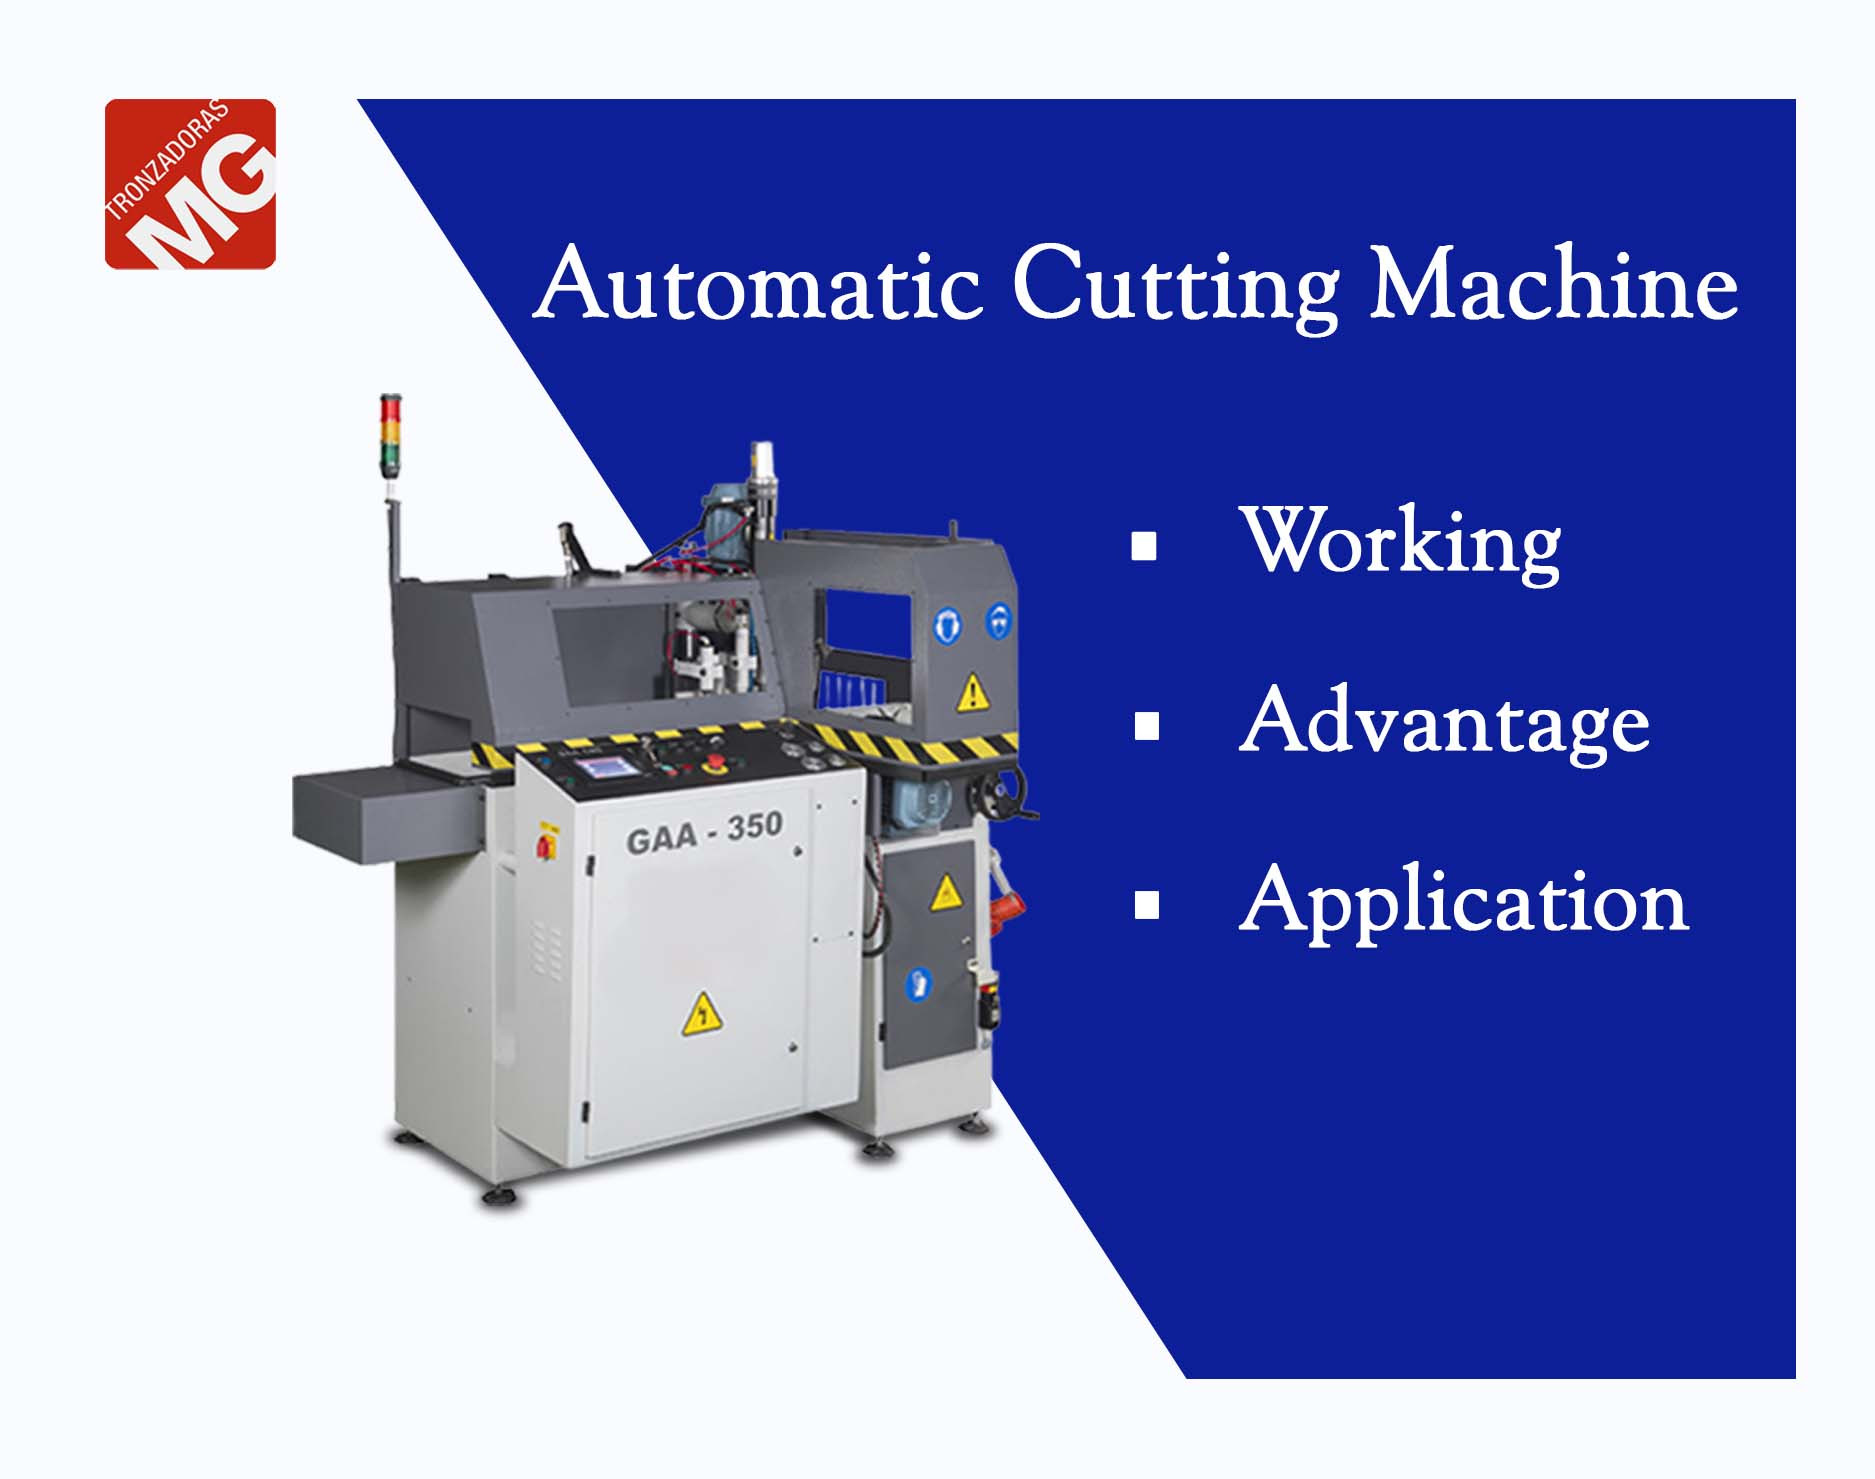 Automatic Cutting Machine  Advantages and Applications